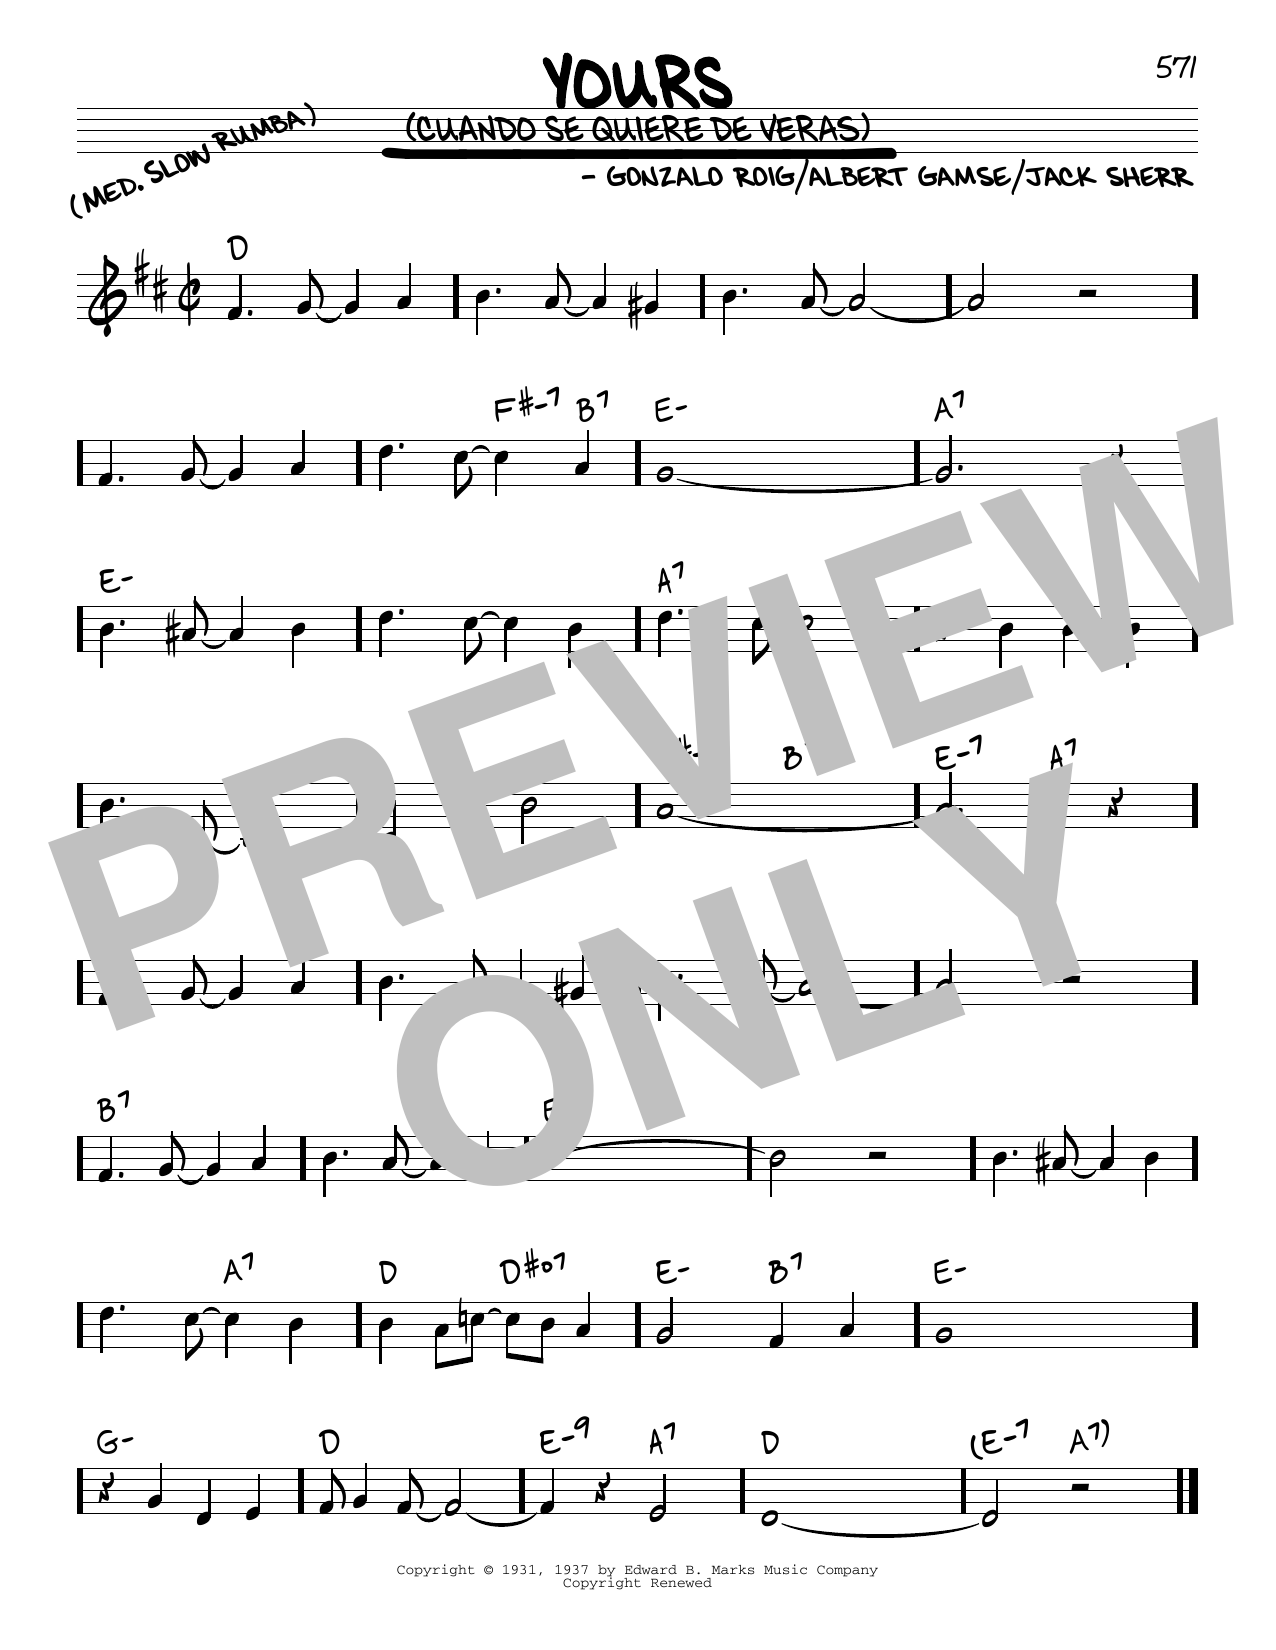 Download Agustin Rodriguez Yours (Quiereme Mucho) Sheet Music